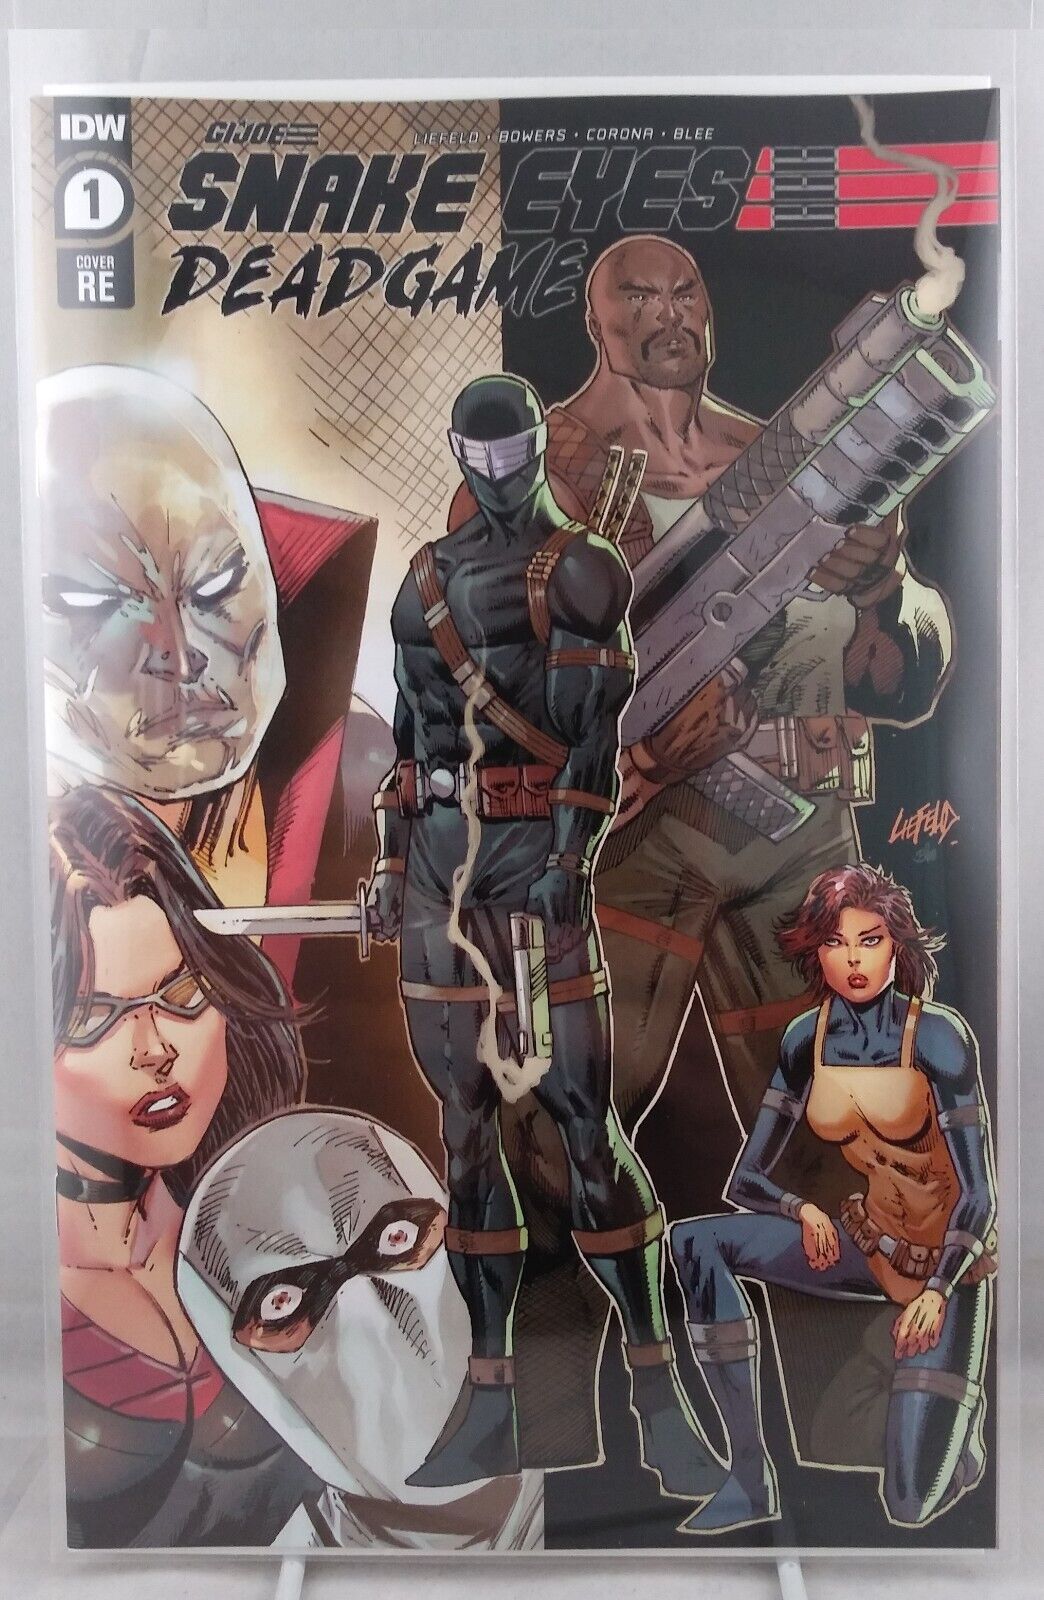 Snake Eyes Deadgame #1 Rob Liefeld Creations New Mutants Variant A Cover IDW